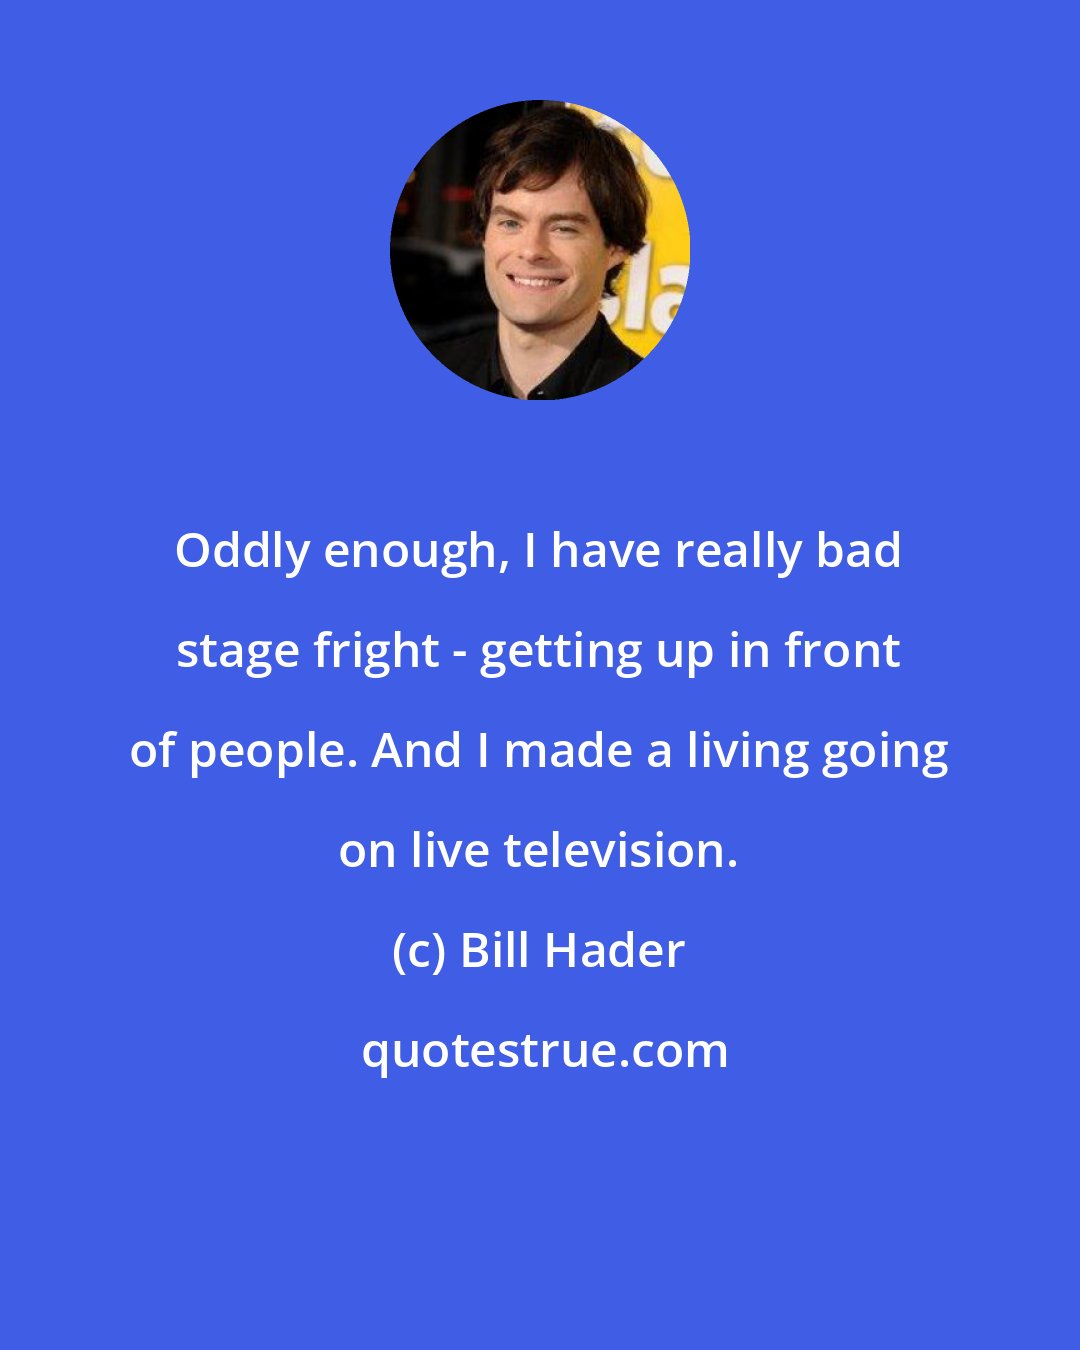 Bill Hader: Oddly enough, I have really bad stage fright - getting up in front of people. And I made a living going on live television.